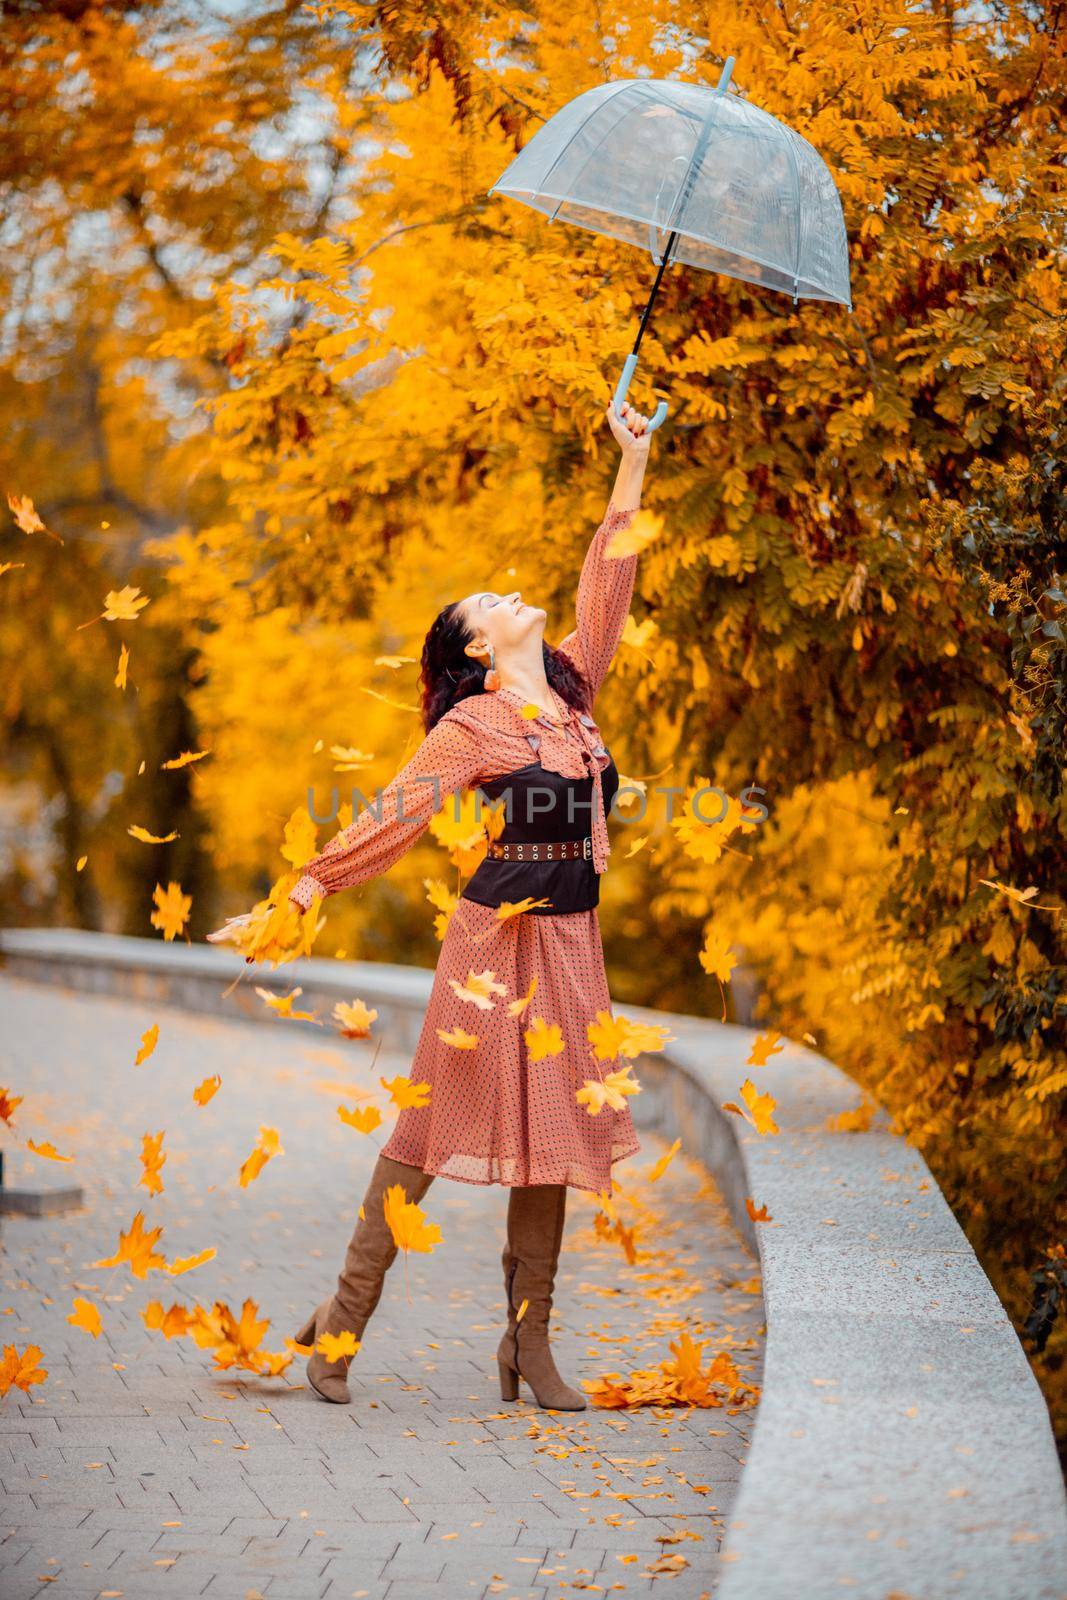 Beautiful girl in a dress with an umbrella in the autumn park. She holds him over her head, autumn leaves are falling out of him.